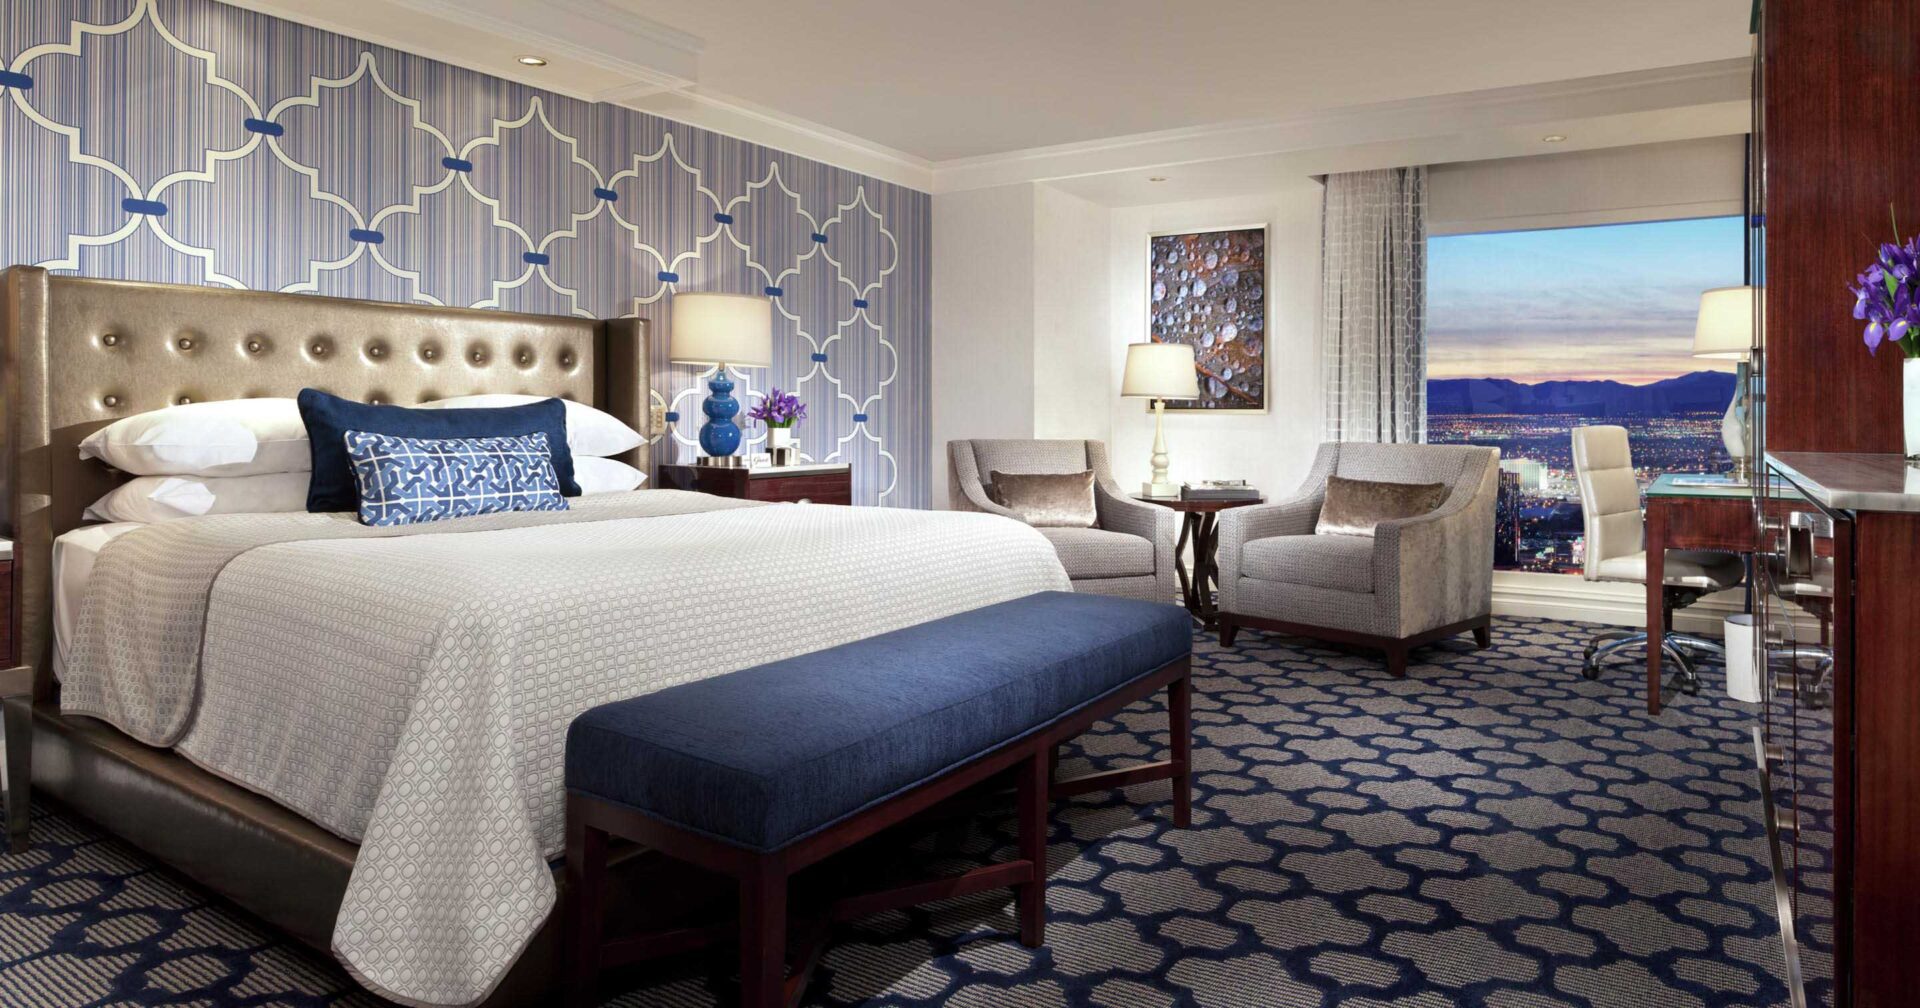 Bellagio room Las Vegas Hotels - available as a free comp if you know how